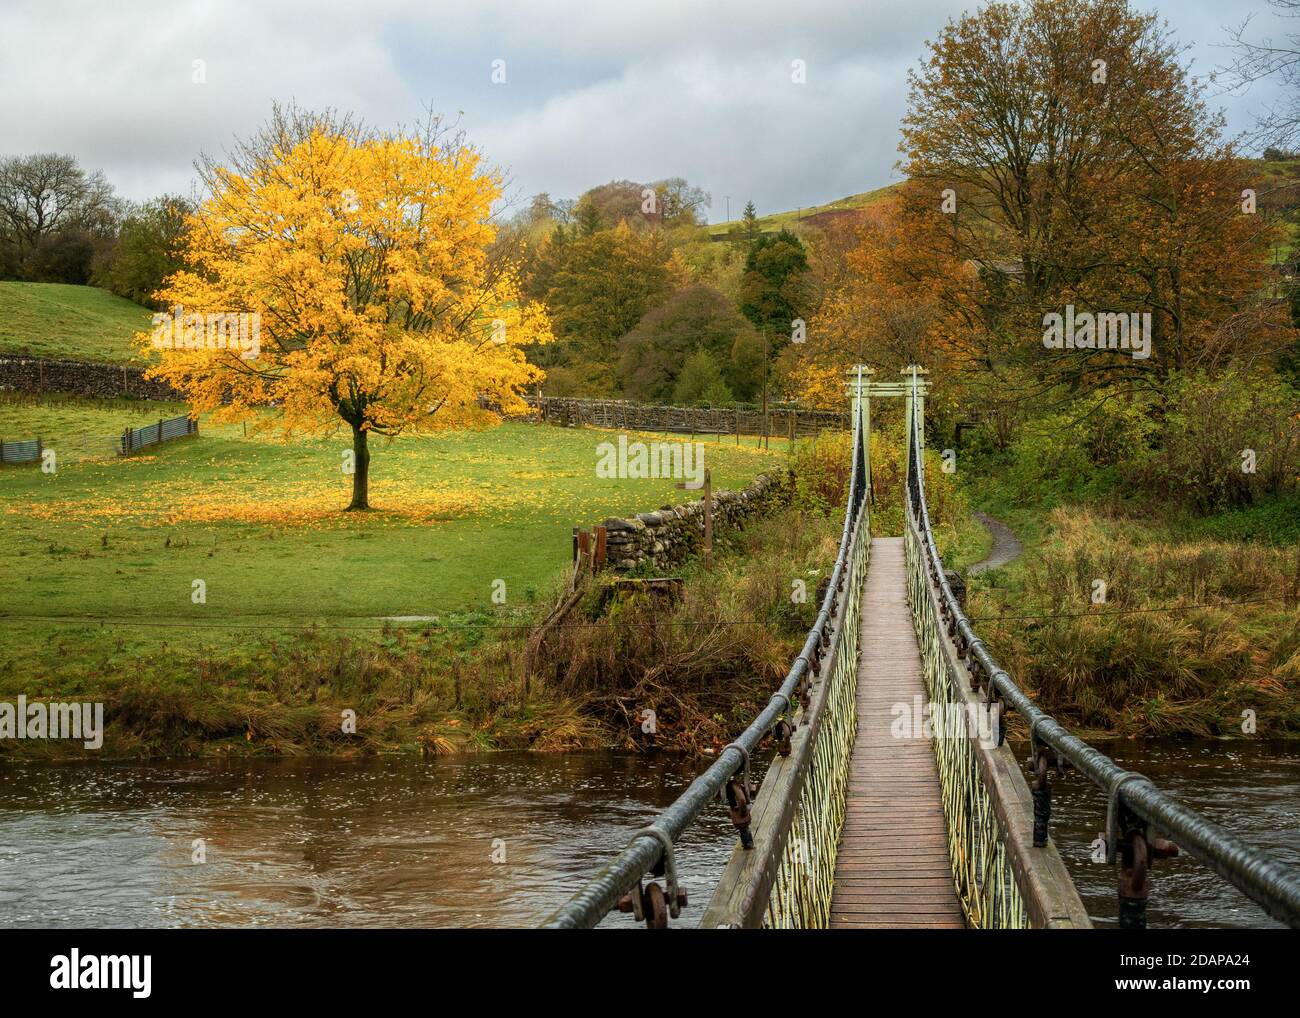 The Hebden suspension bridge on the Dales Way over the River Wharfe in autumn, Yorkshire Dales National Park, UK landscape Stock Photo